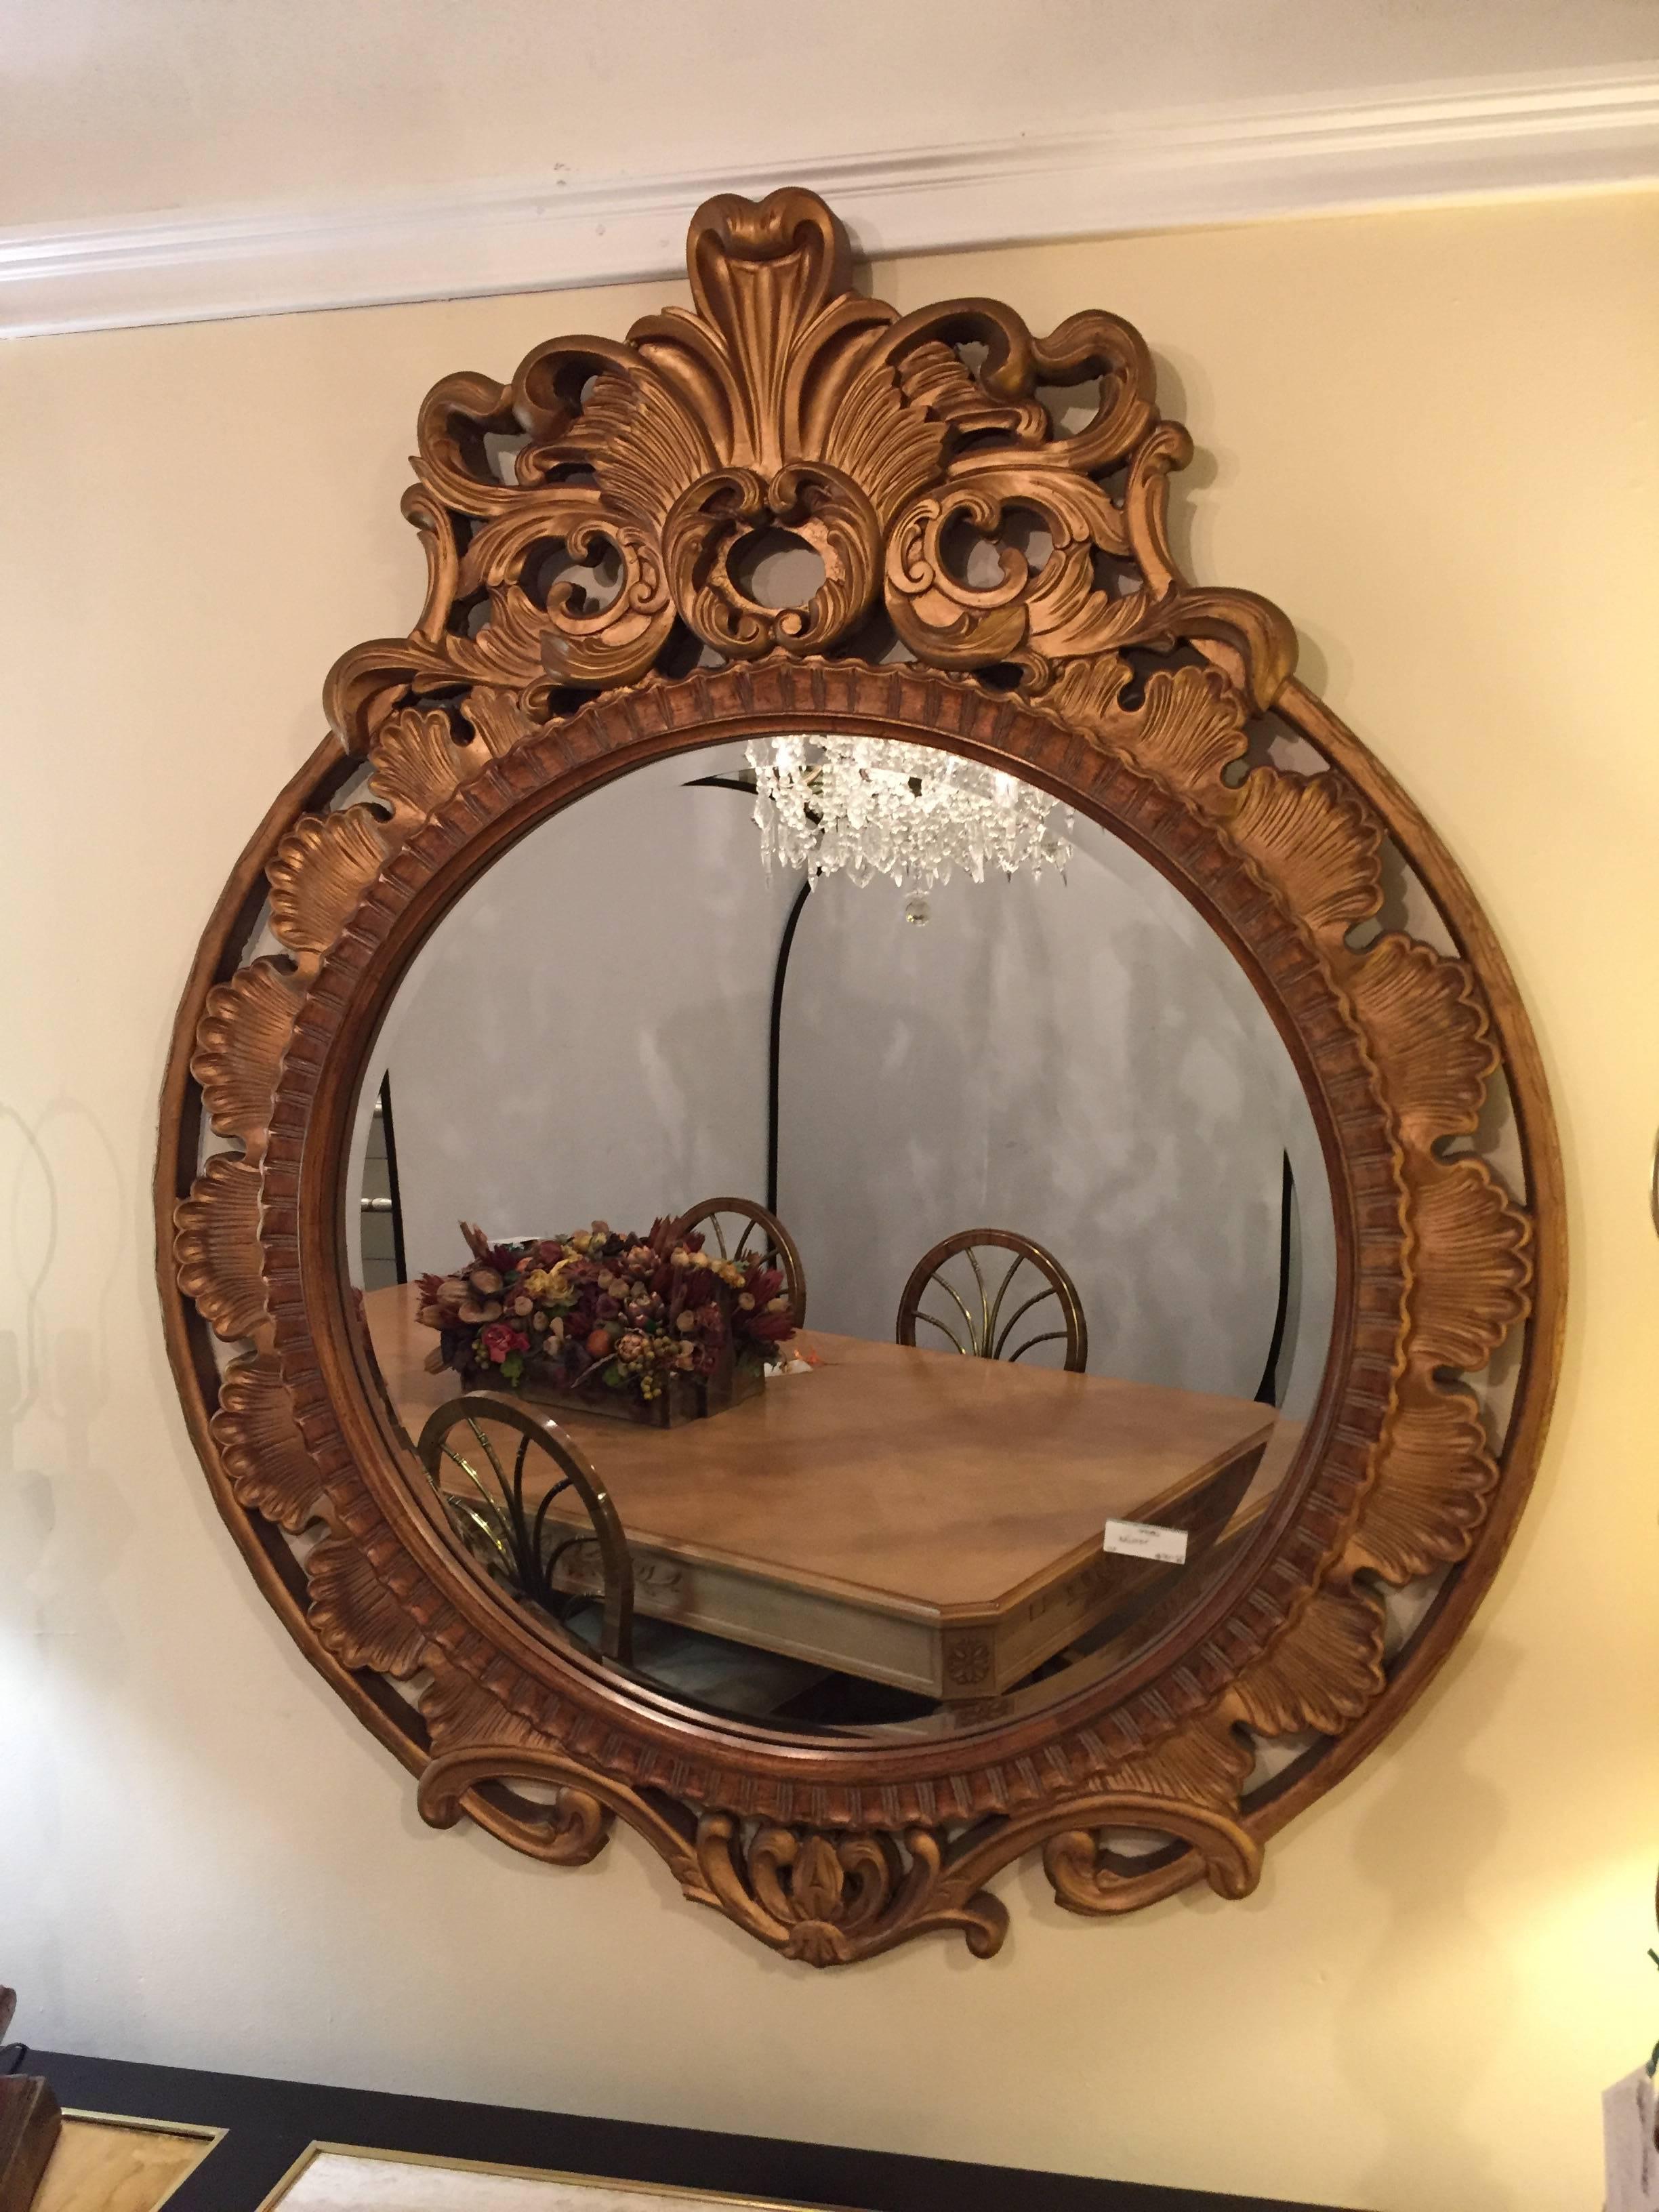 Palatial gilt decorated carved circular wall or console mirror. The clean and clear center circular mirror framed in a heavily carved giltwood frame. The interior frame of shell design flowing onto an outer frame of scroll and leaf design.